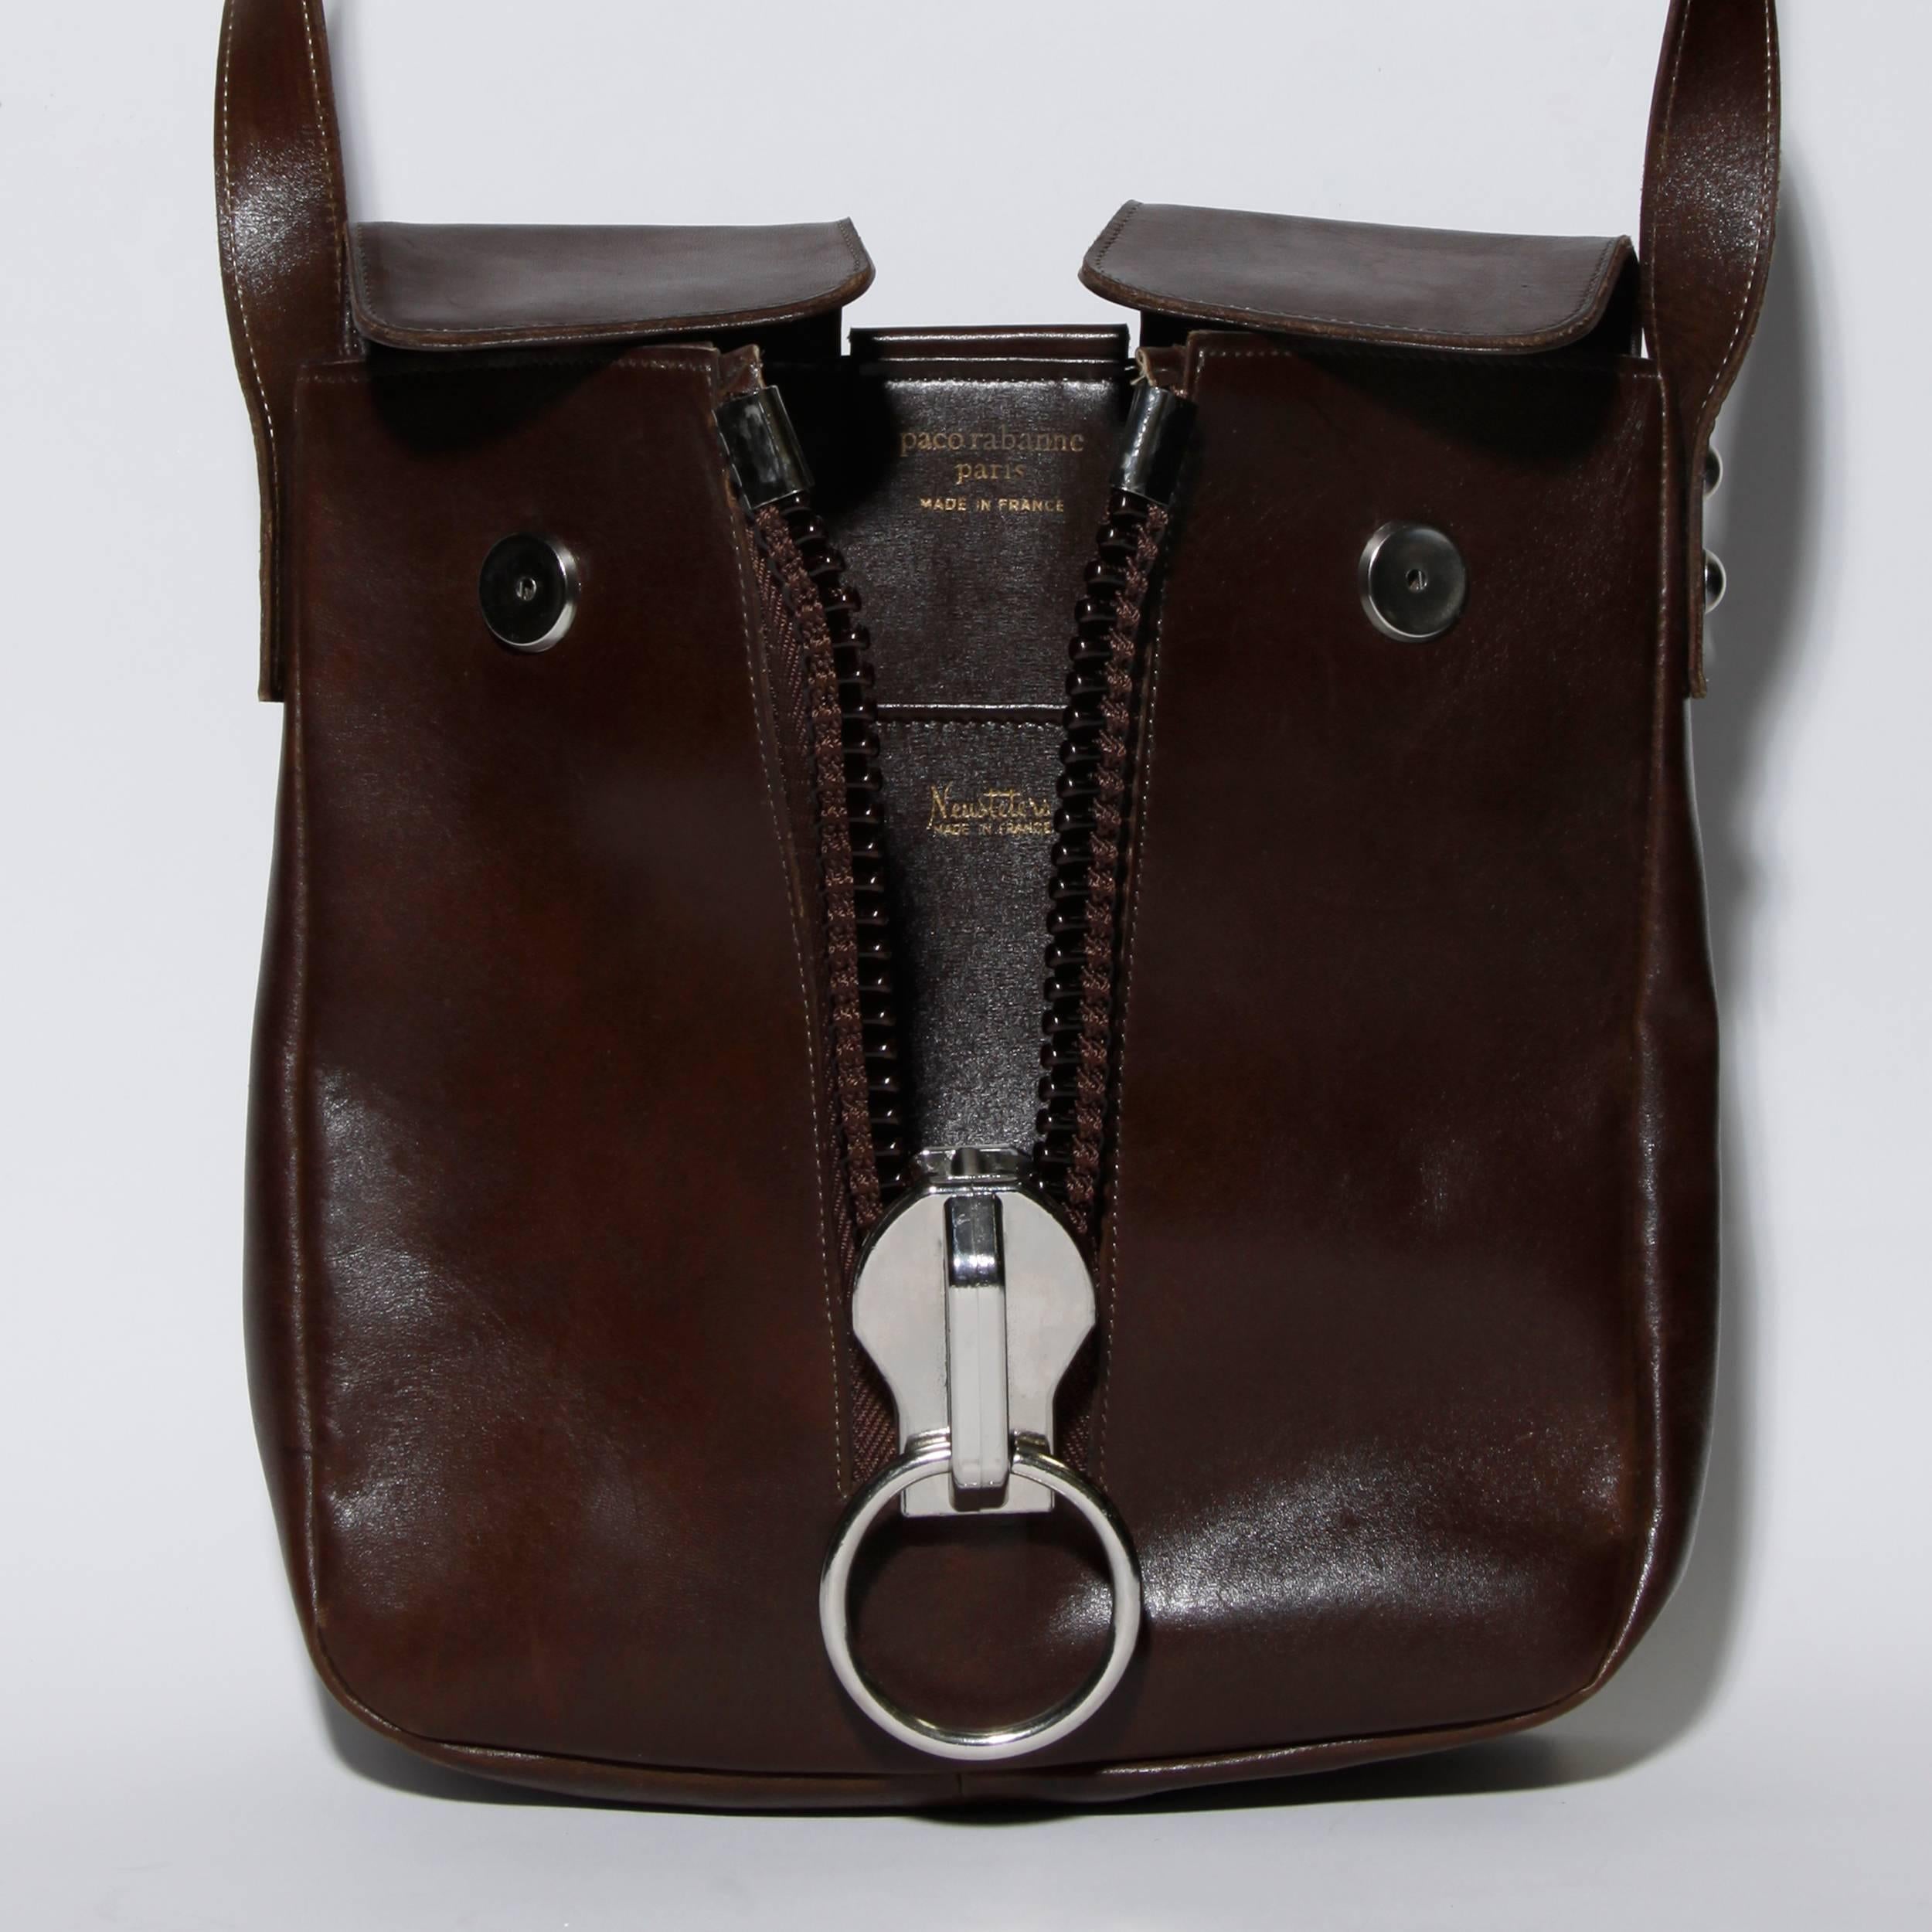 Rare vintage 1960s Paco Rabanne brown leather crossbody bag with a massive oversized metal zipper detail. Incredible modernist design- the zipper works!

Details:

Fully Lined in Leather
Inside Pocket
Front Snap Closure 
Color: